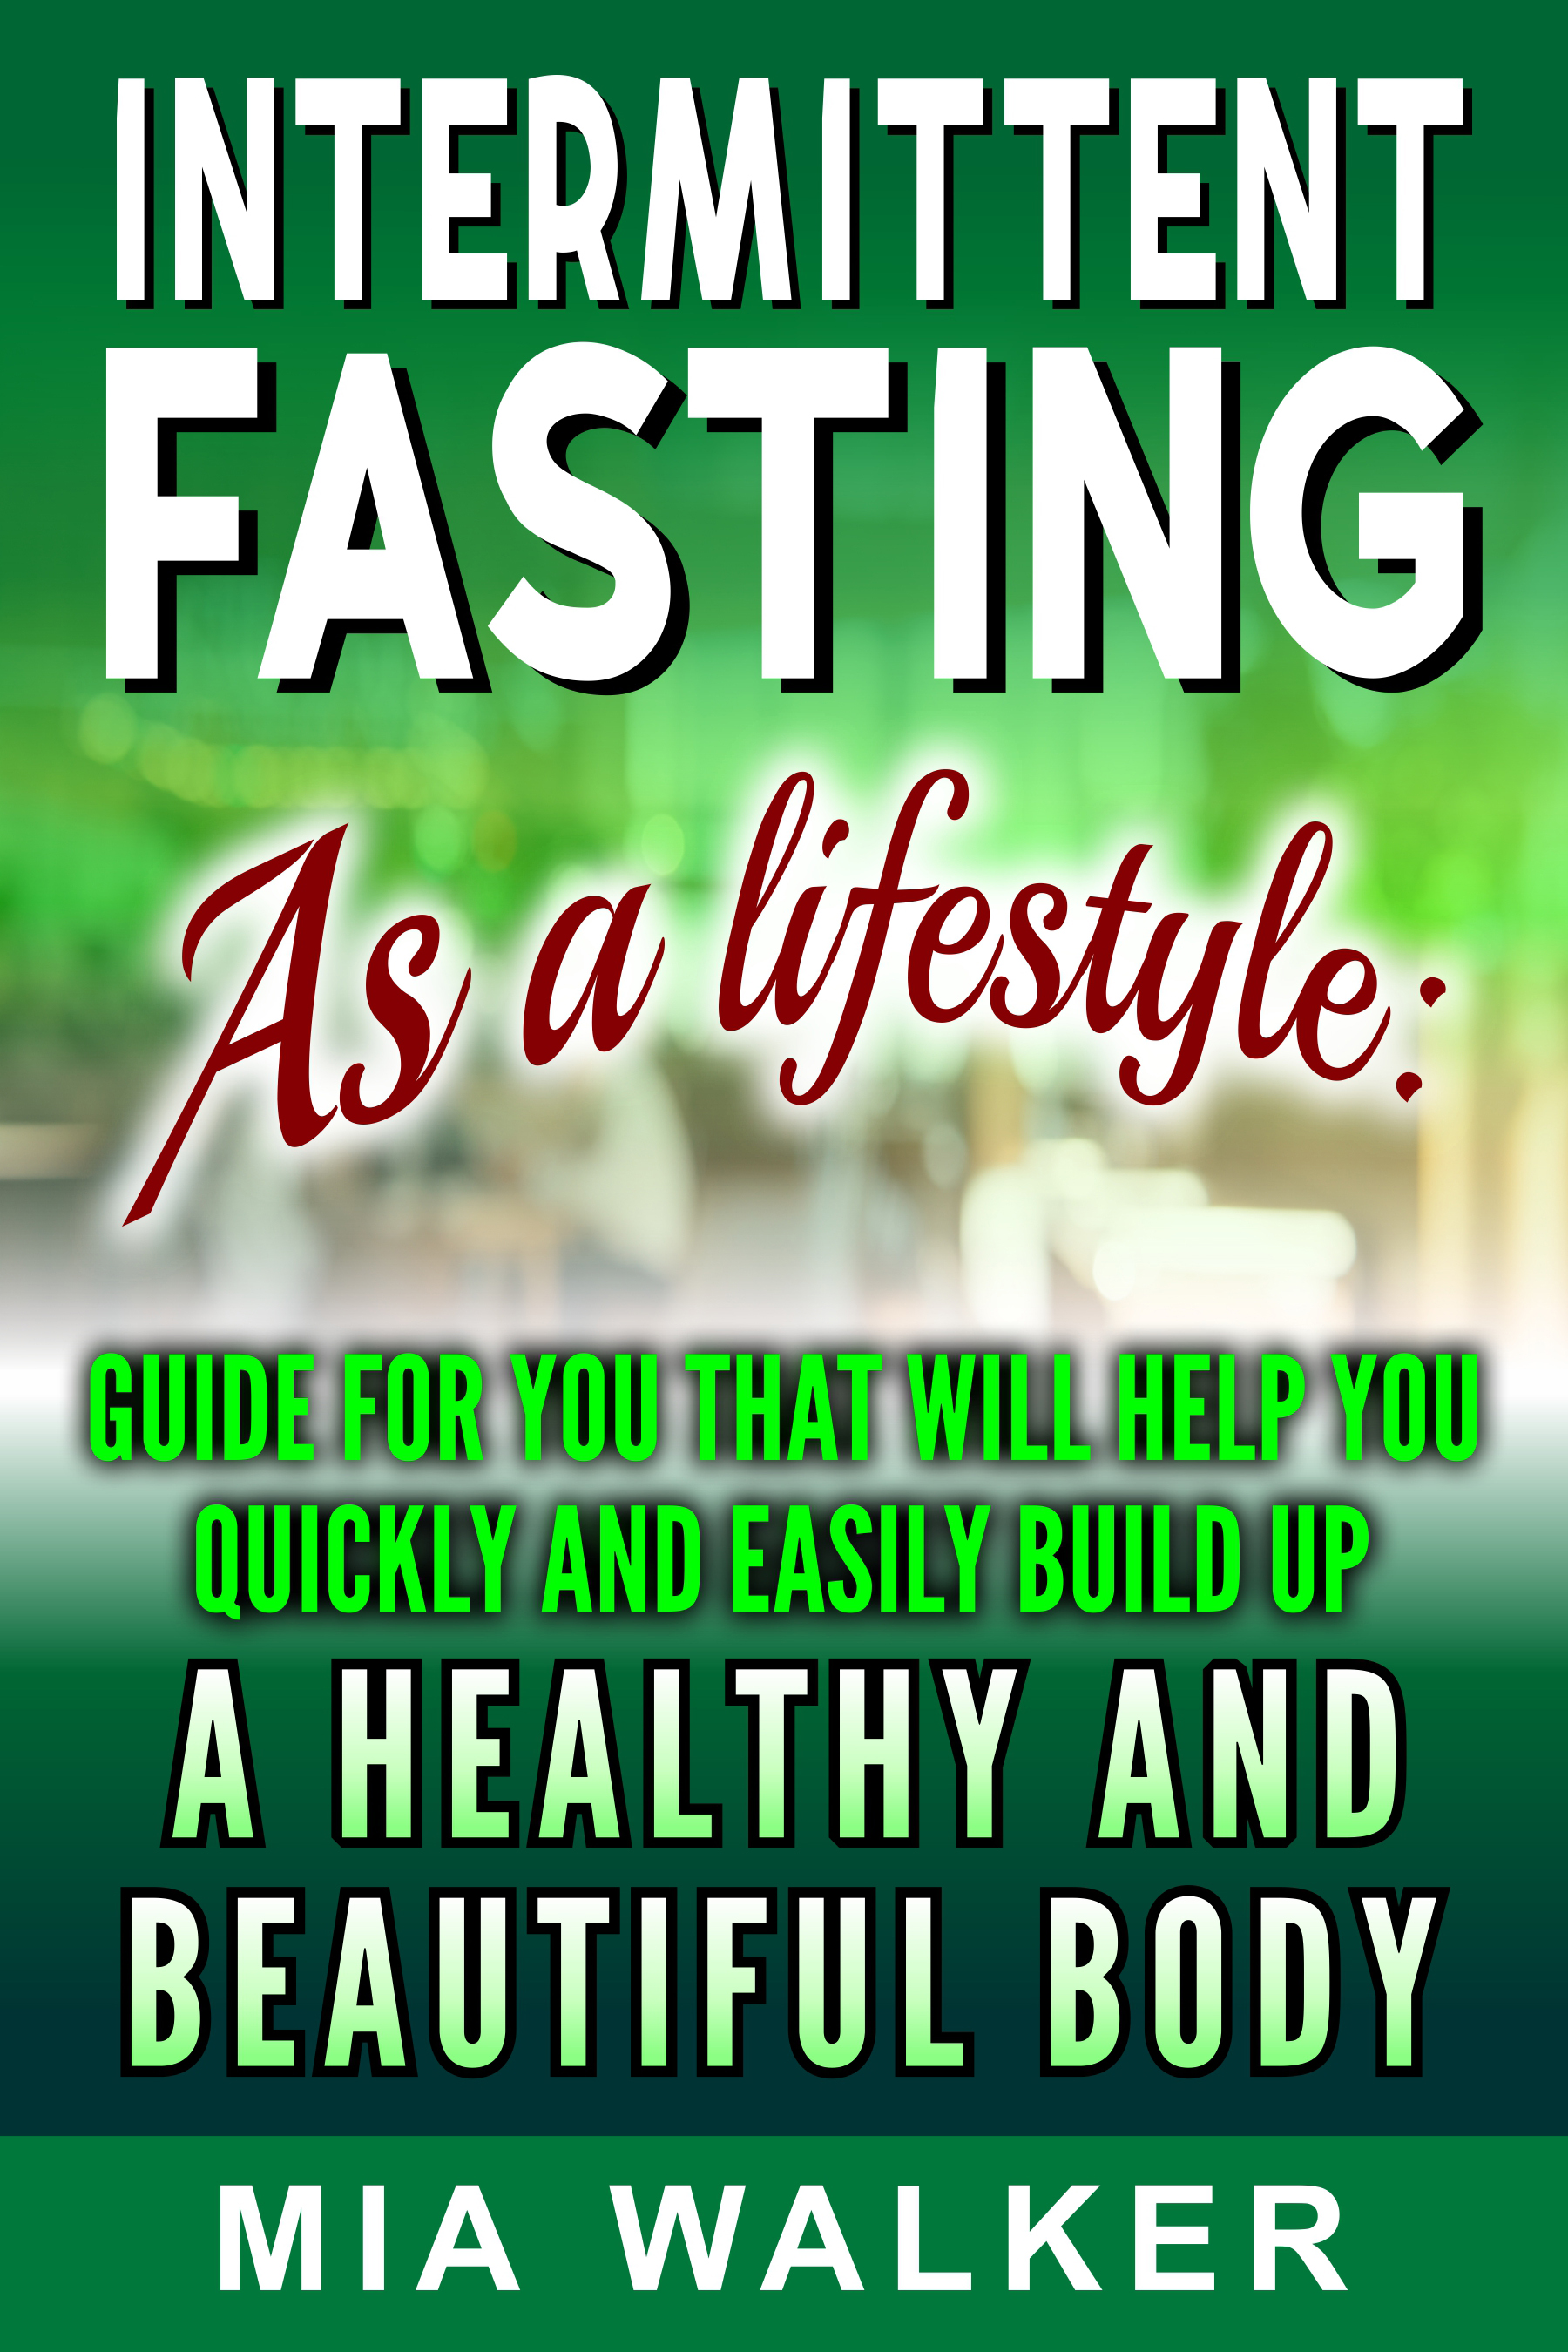 FREE: Intermittent Fasting as a Lifestyle: Guide for you that will help you quickly and easily build up a Healthy and Beautiful Body by Mia Walkker